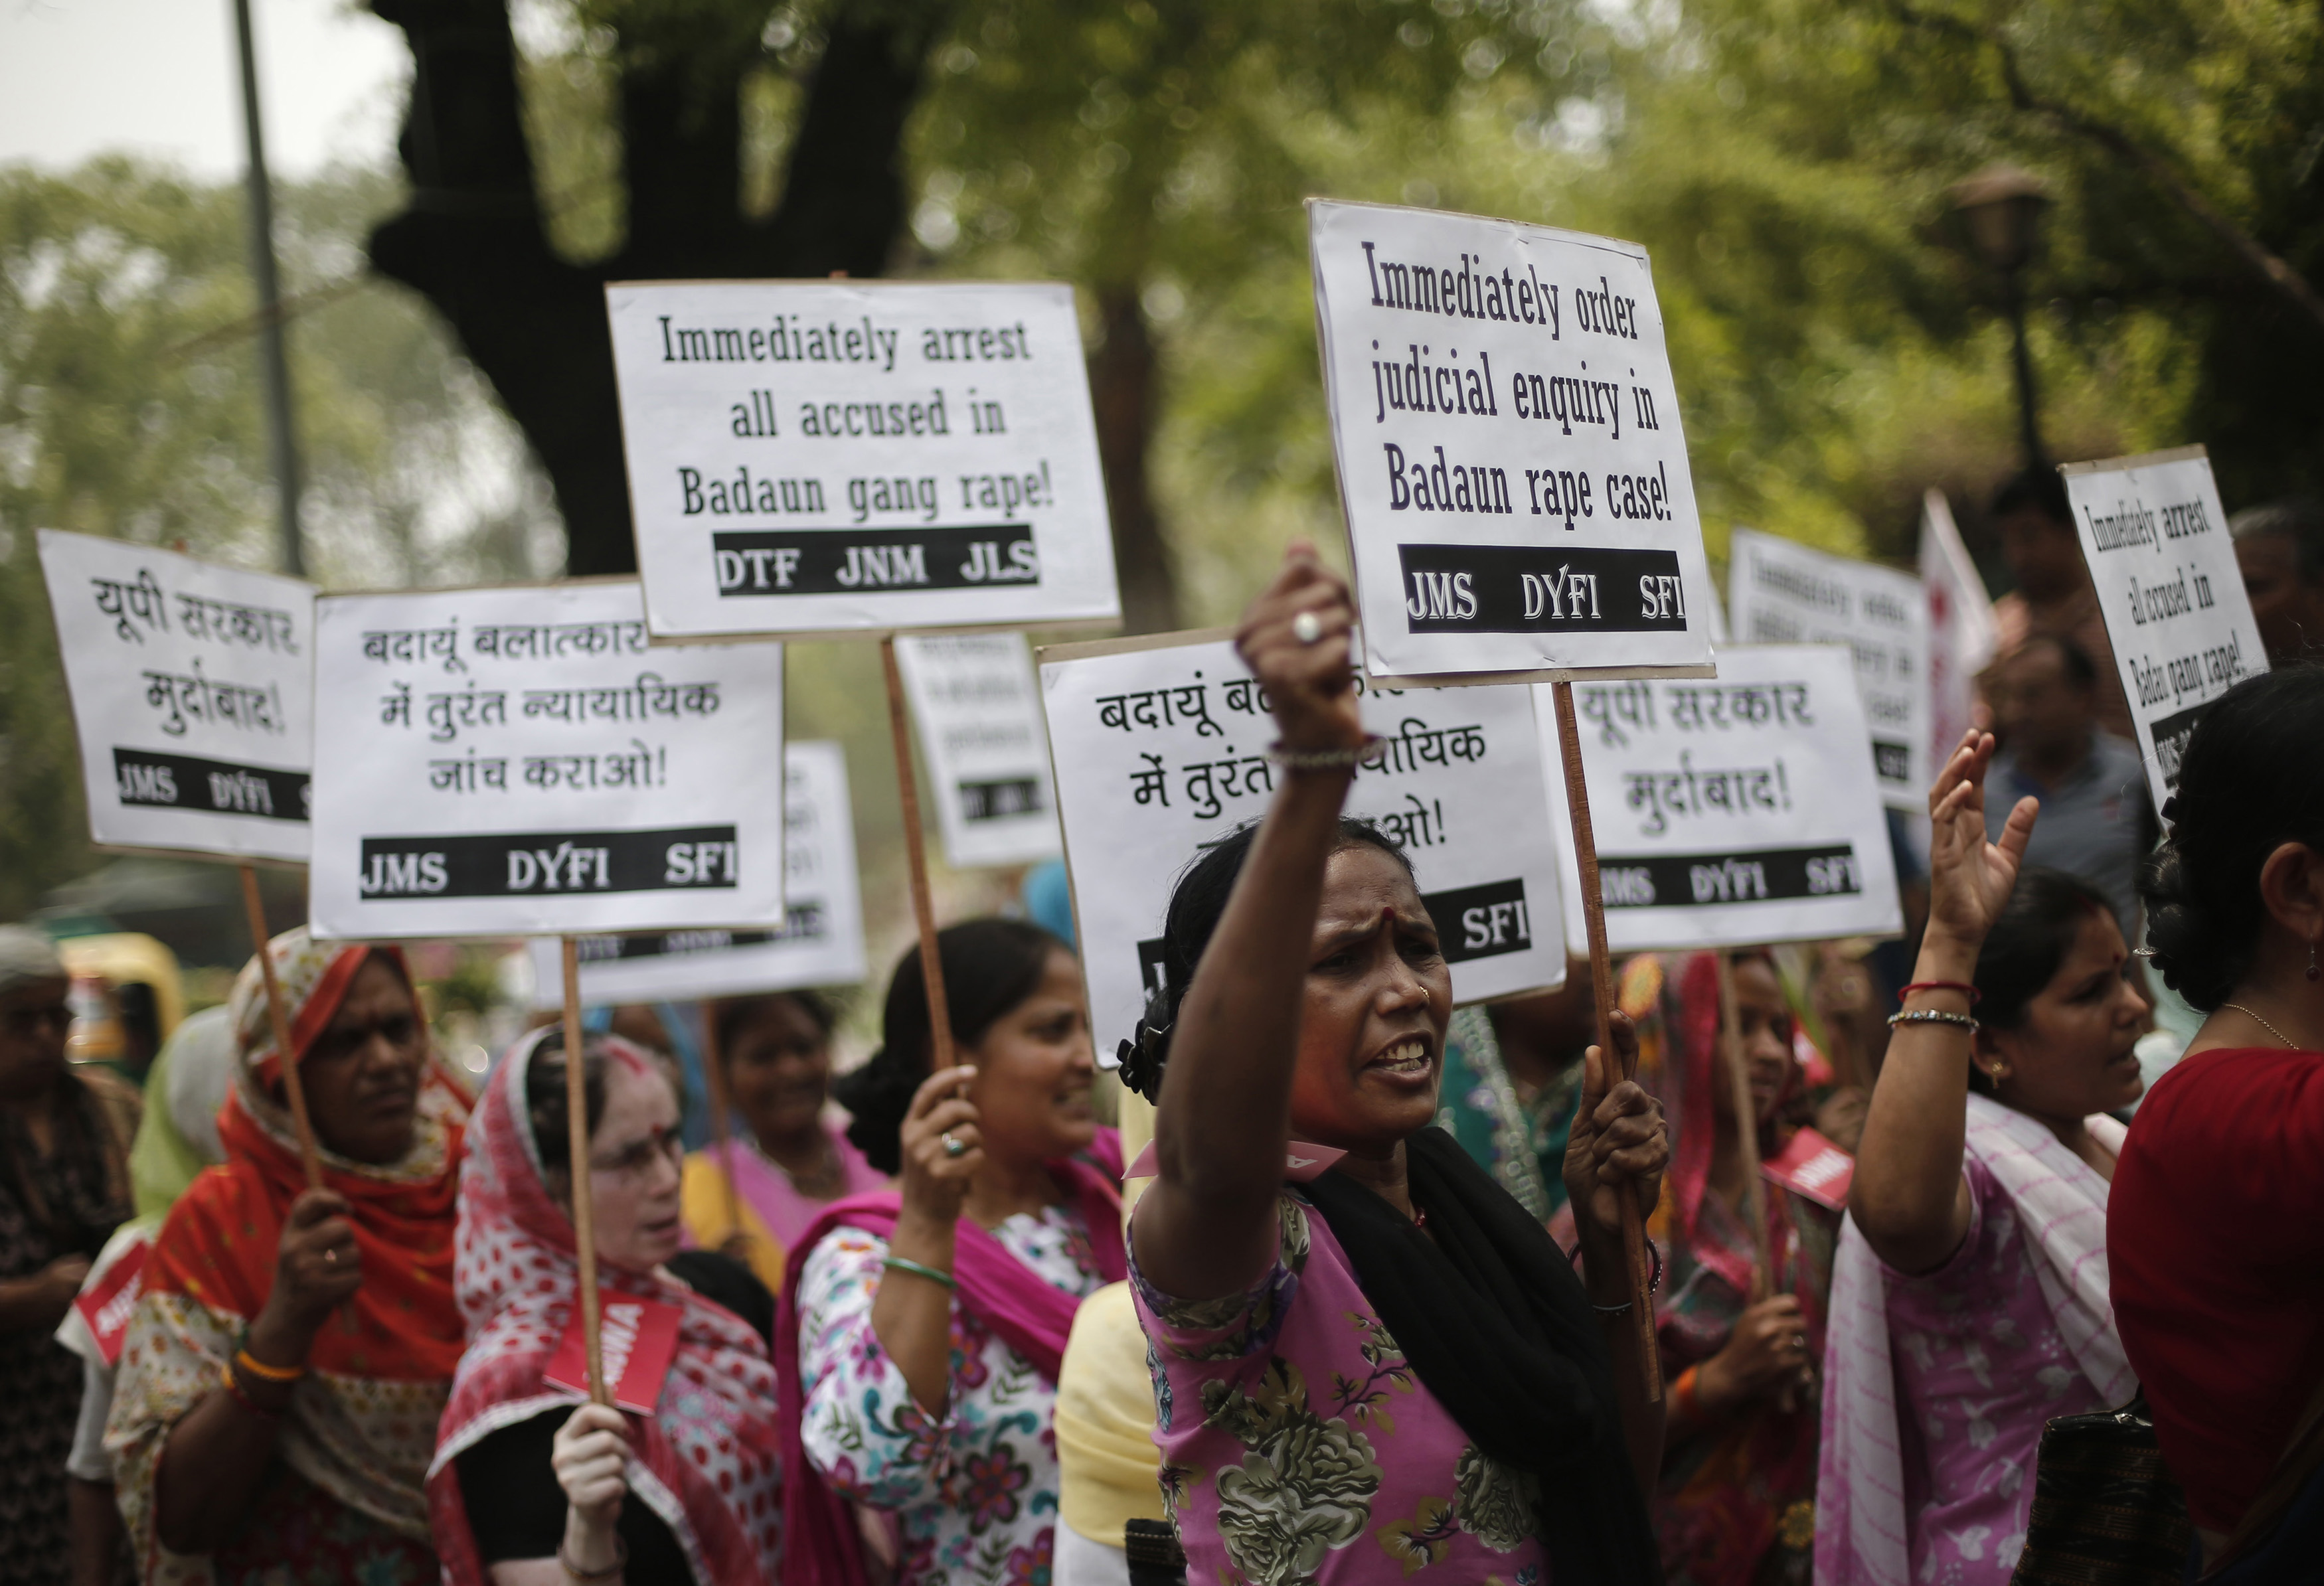 Demonstrators from the All India Democratic Women's Association hold placards and shout slogans during a protest against the rape and murder of two teenage girls, in New Delhi on May 31, 2014 (Adnan Abidi—Reuters)